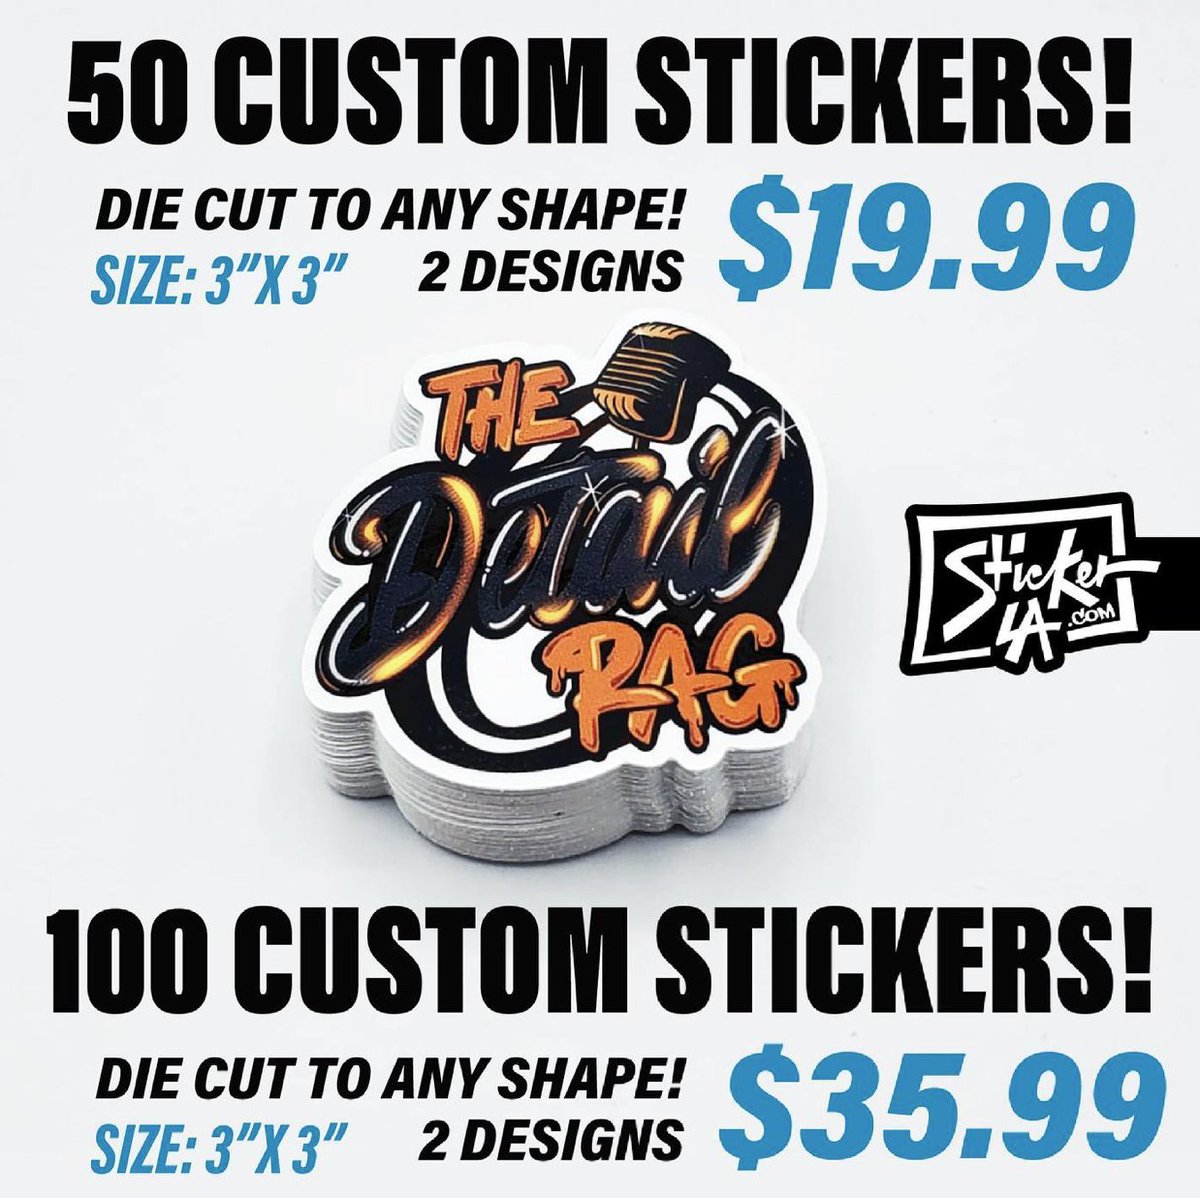 Order your stickers today!! We got this Deal right now.. stickerla.com/collections/ou…